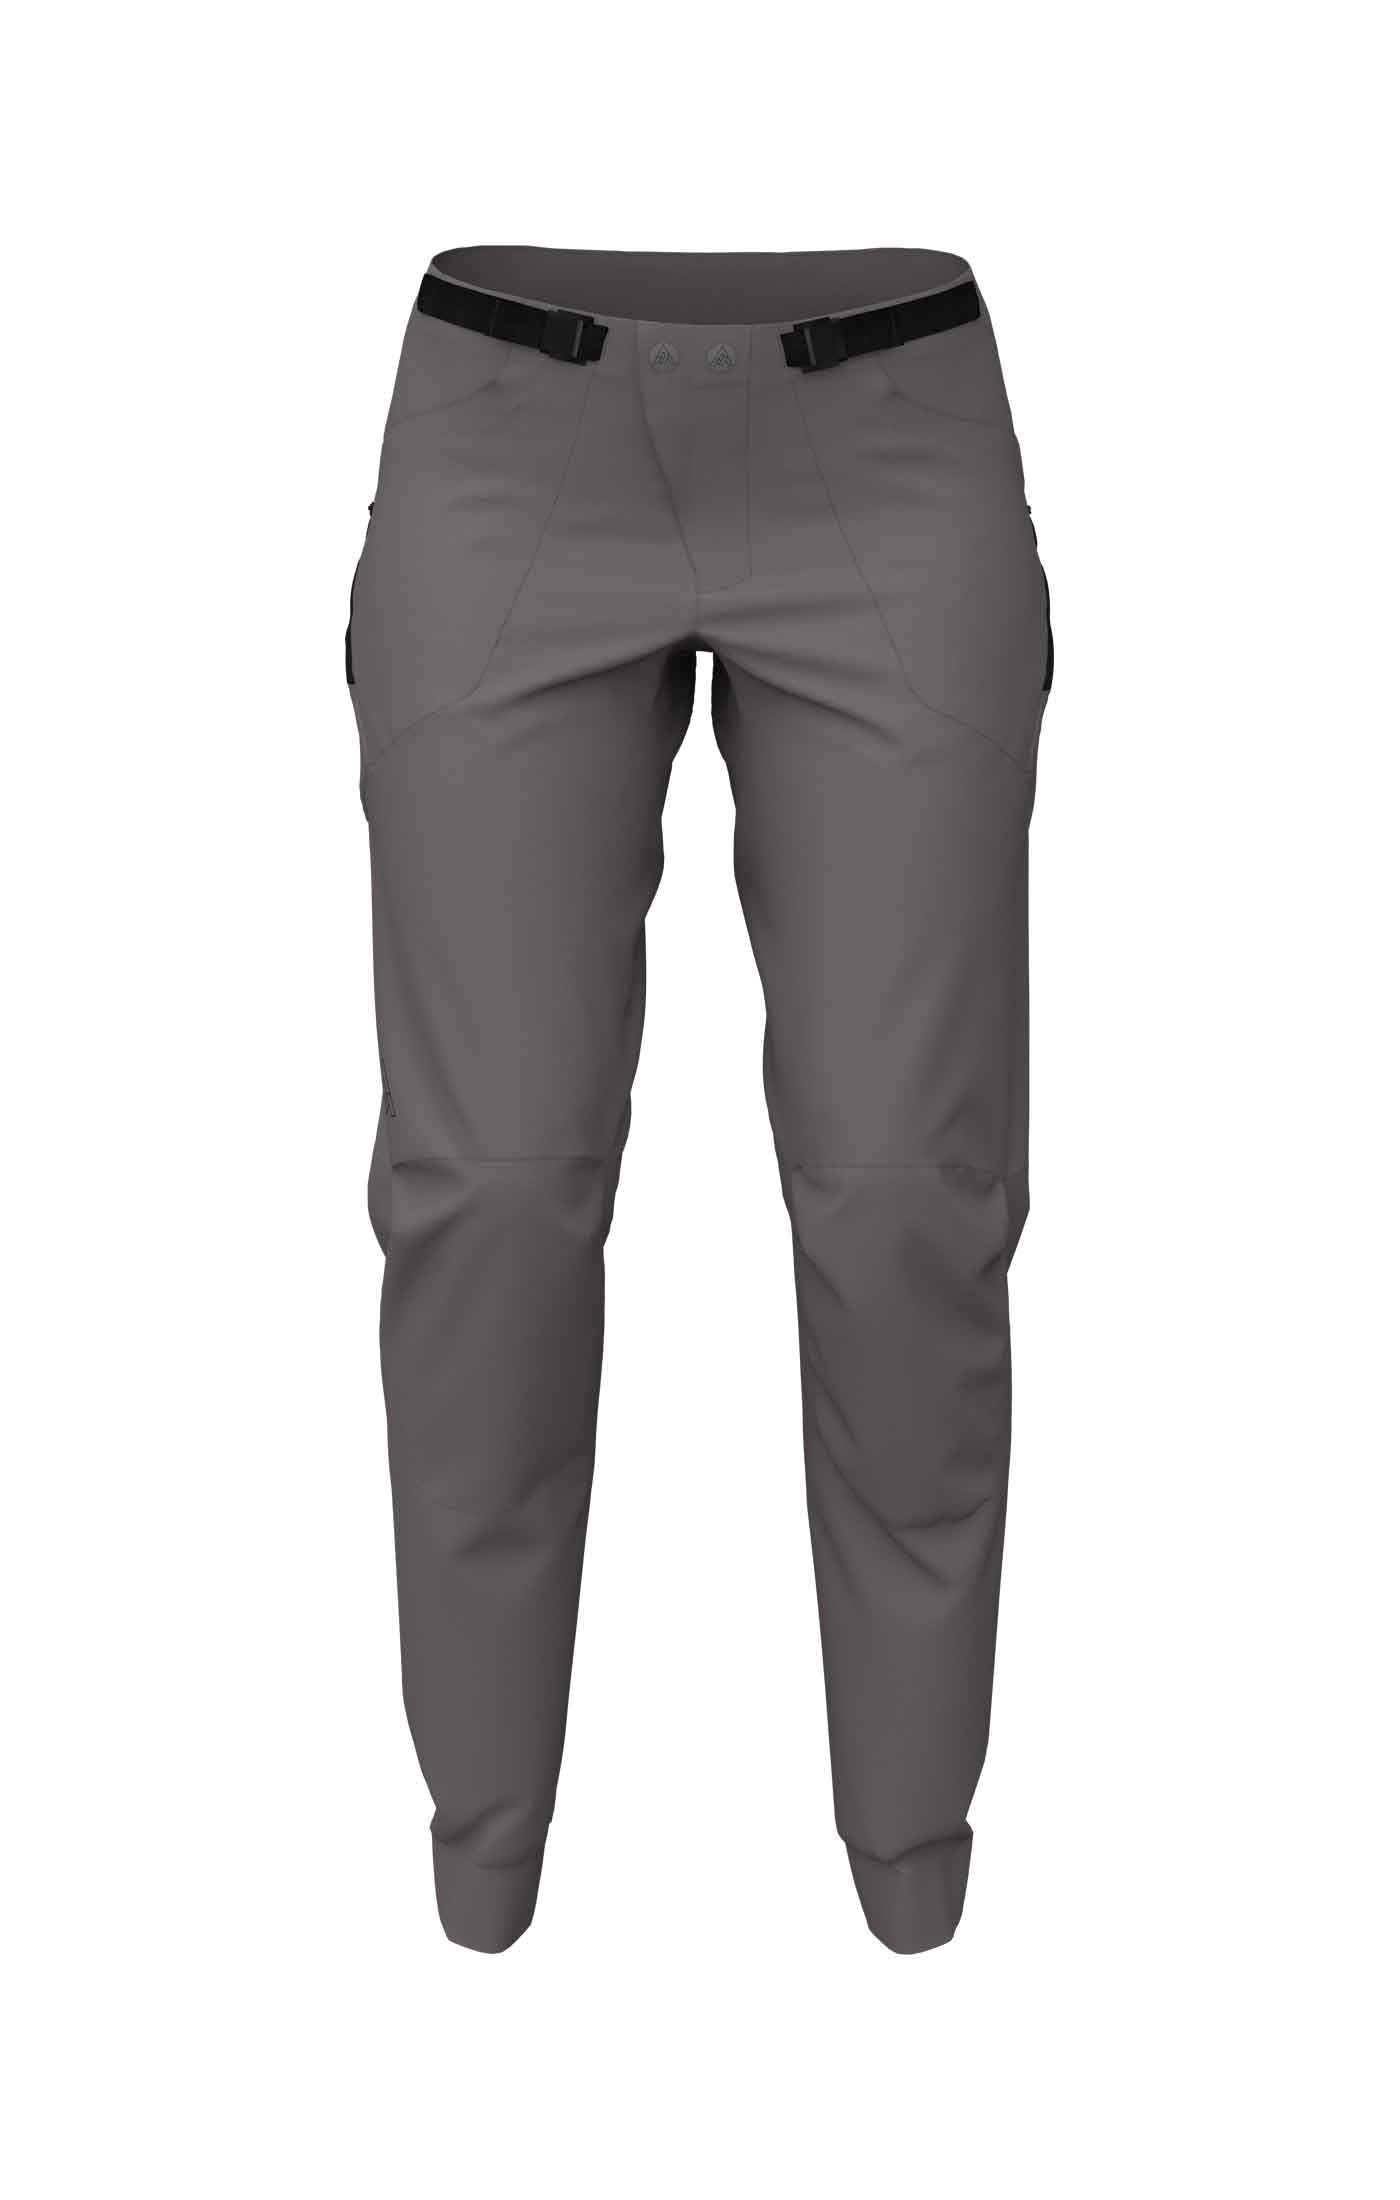 GLIDEPATH PANT WOMEN'S - Revised